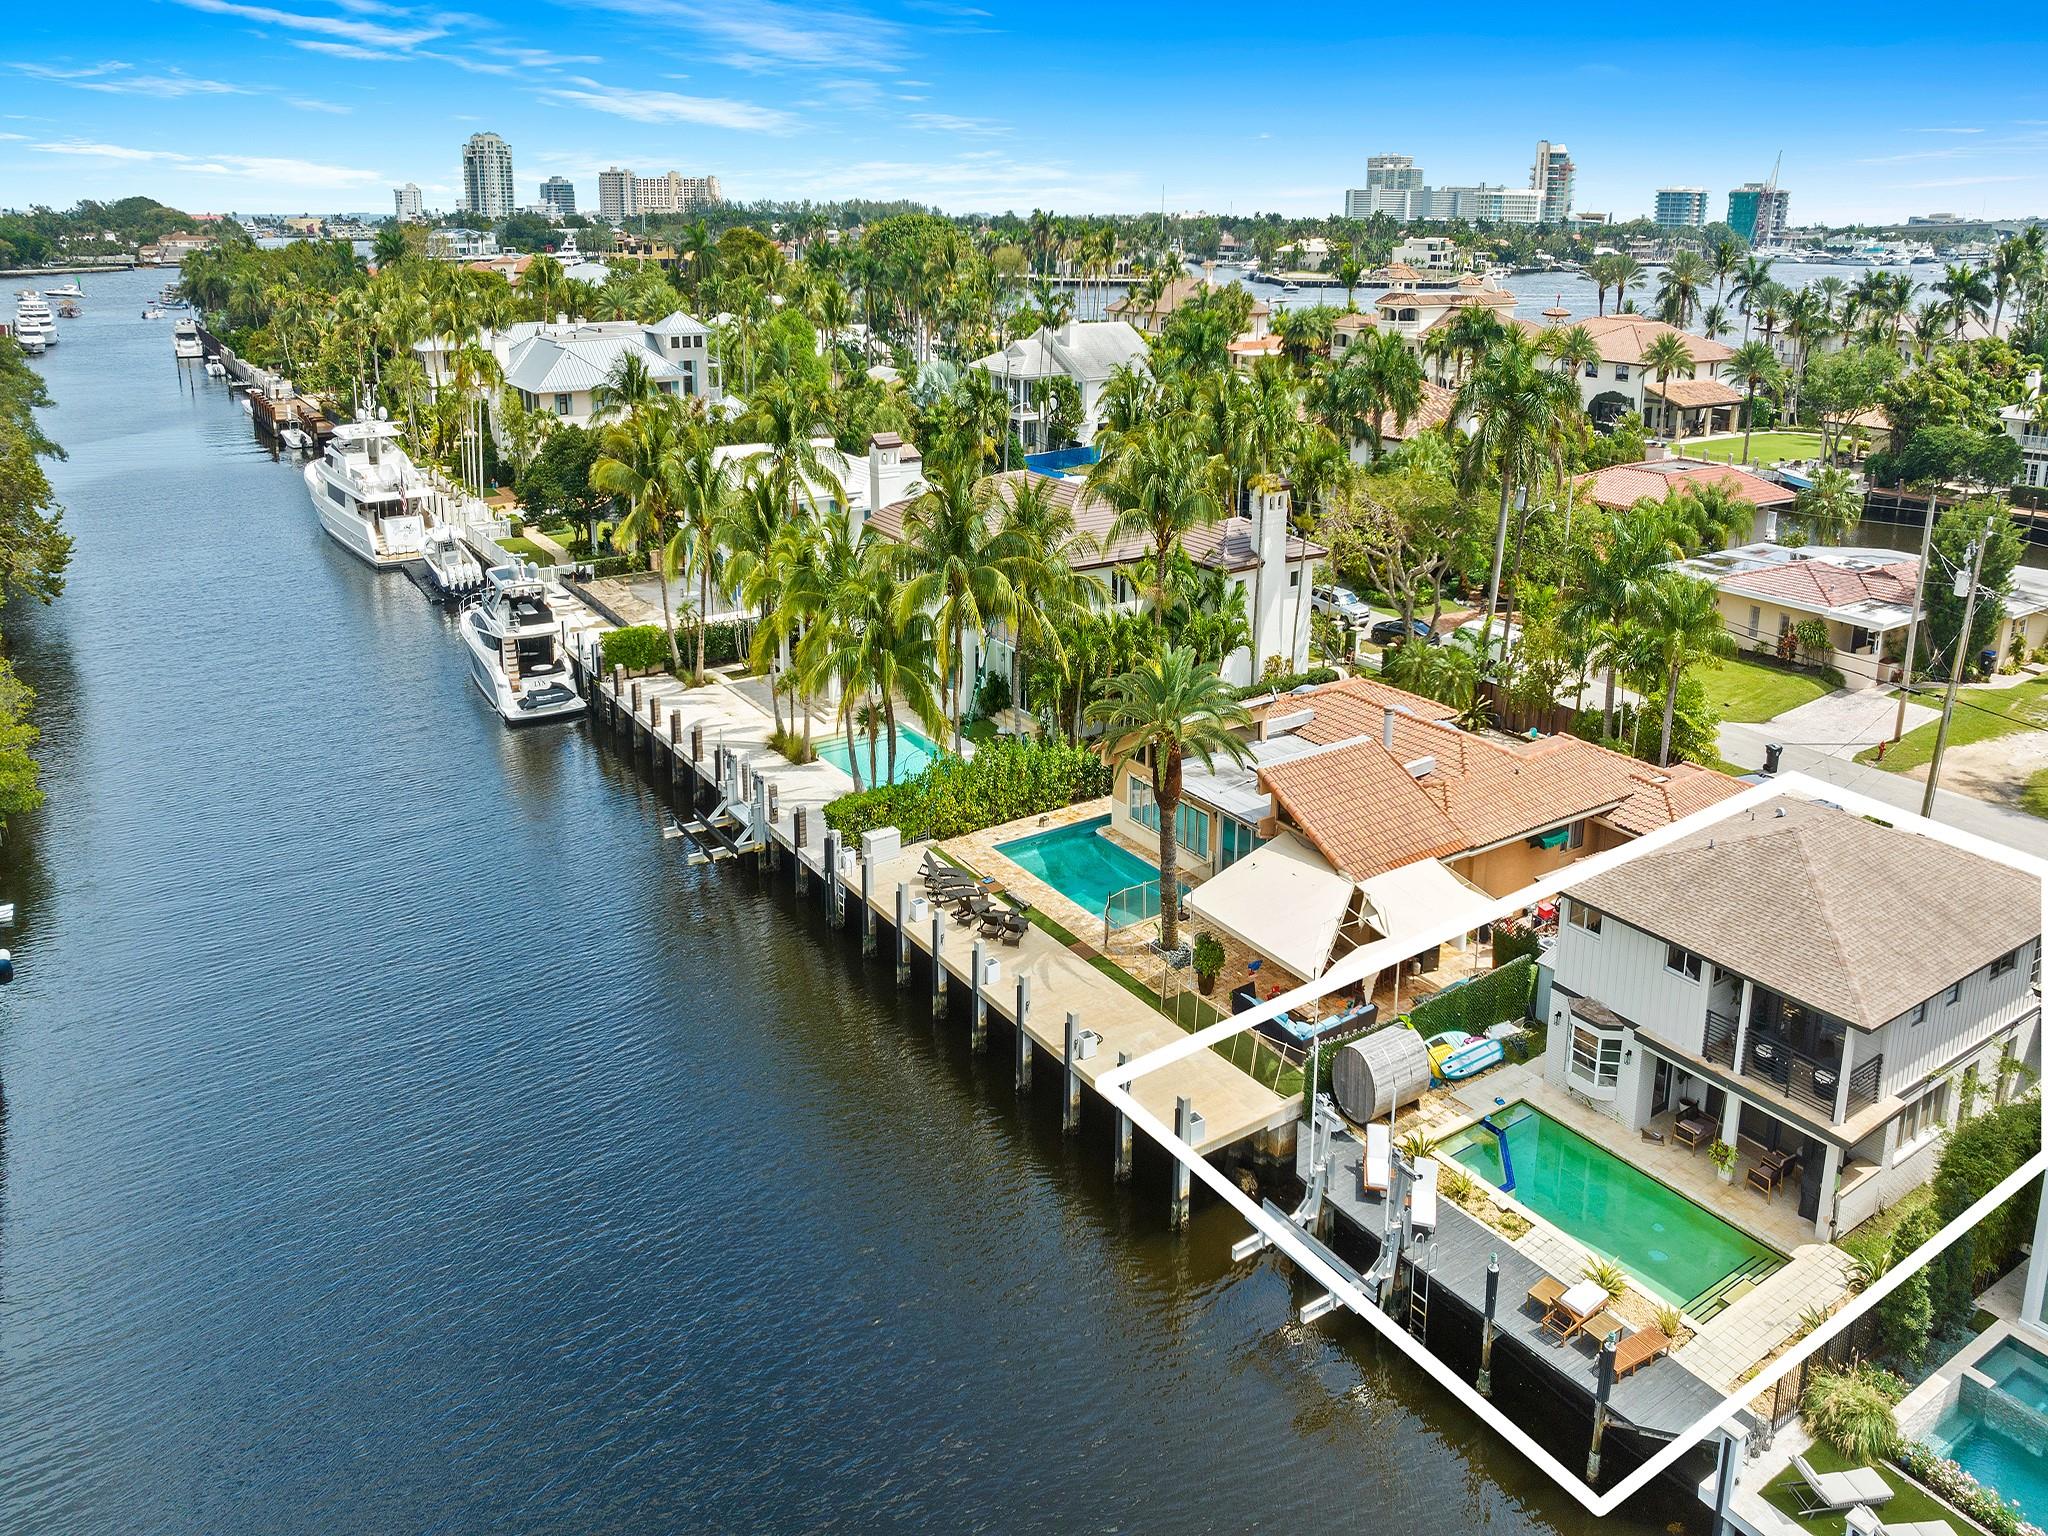 Located at one of the finest isles of Rio Vista with the quickest ocean access. NO FIXED BRIDGES. Surrounded by multimillion dollar residences. This location is yacht owner's paradise. Impeccably maintained residence sits on a 50FT WATER-FRONTAGE and has stunning water views from every corner. Some of the features include: BOAT LIFT, office room, covered patio with BBQ, brand new deck, fire place, laundry room, driveway, private waterfront terrace, den, HIS AND HER CLOSETS, newer roof, new appliances, brand new AC units, new floors, custom sound system throughout, security cameras at the exterior, grass area for kids & pets and many more! Completely renovated in 2022. Best school district. Great luxury rental potential. Furniture negotiable. No HOA or restrictions.